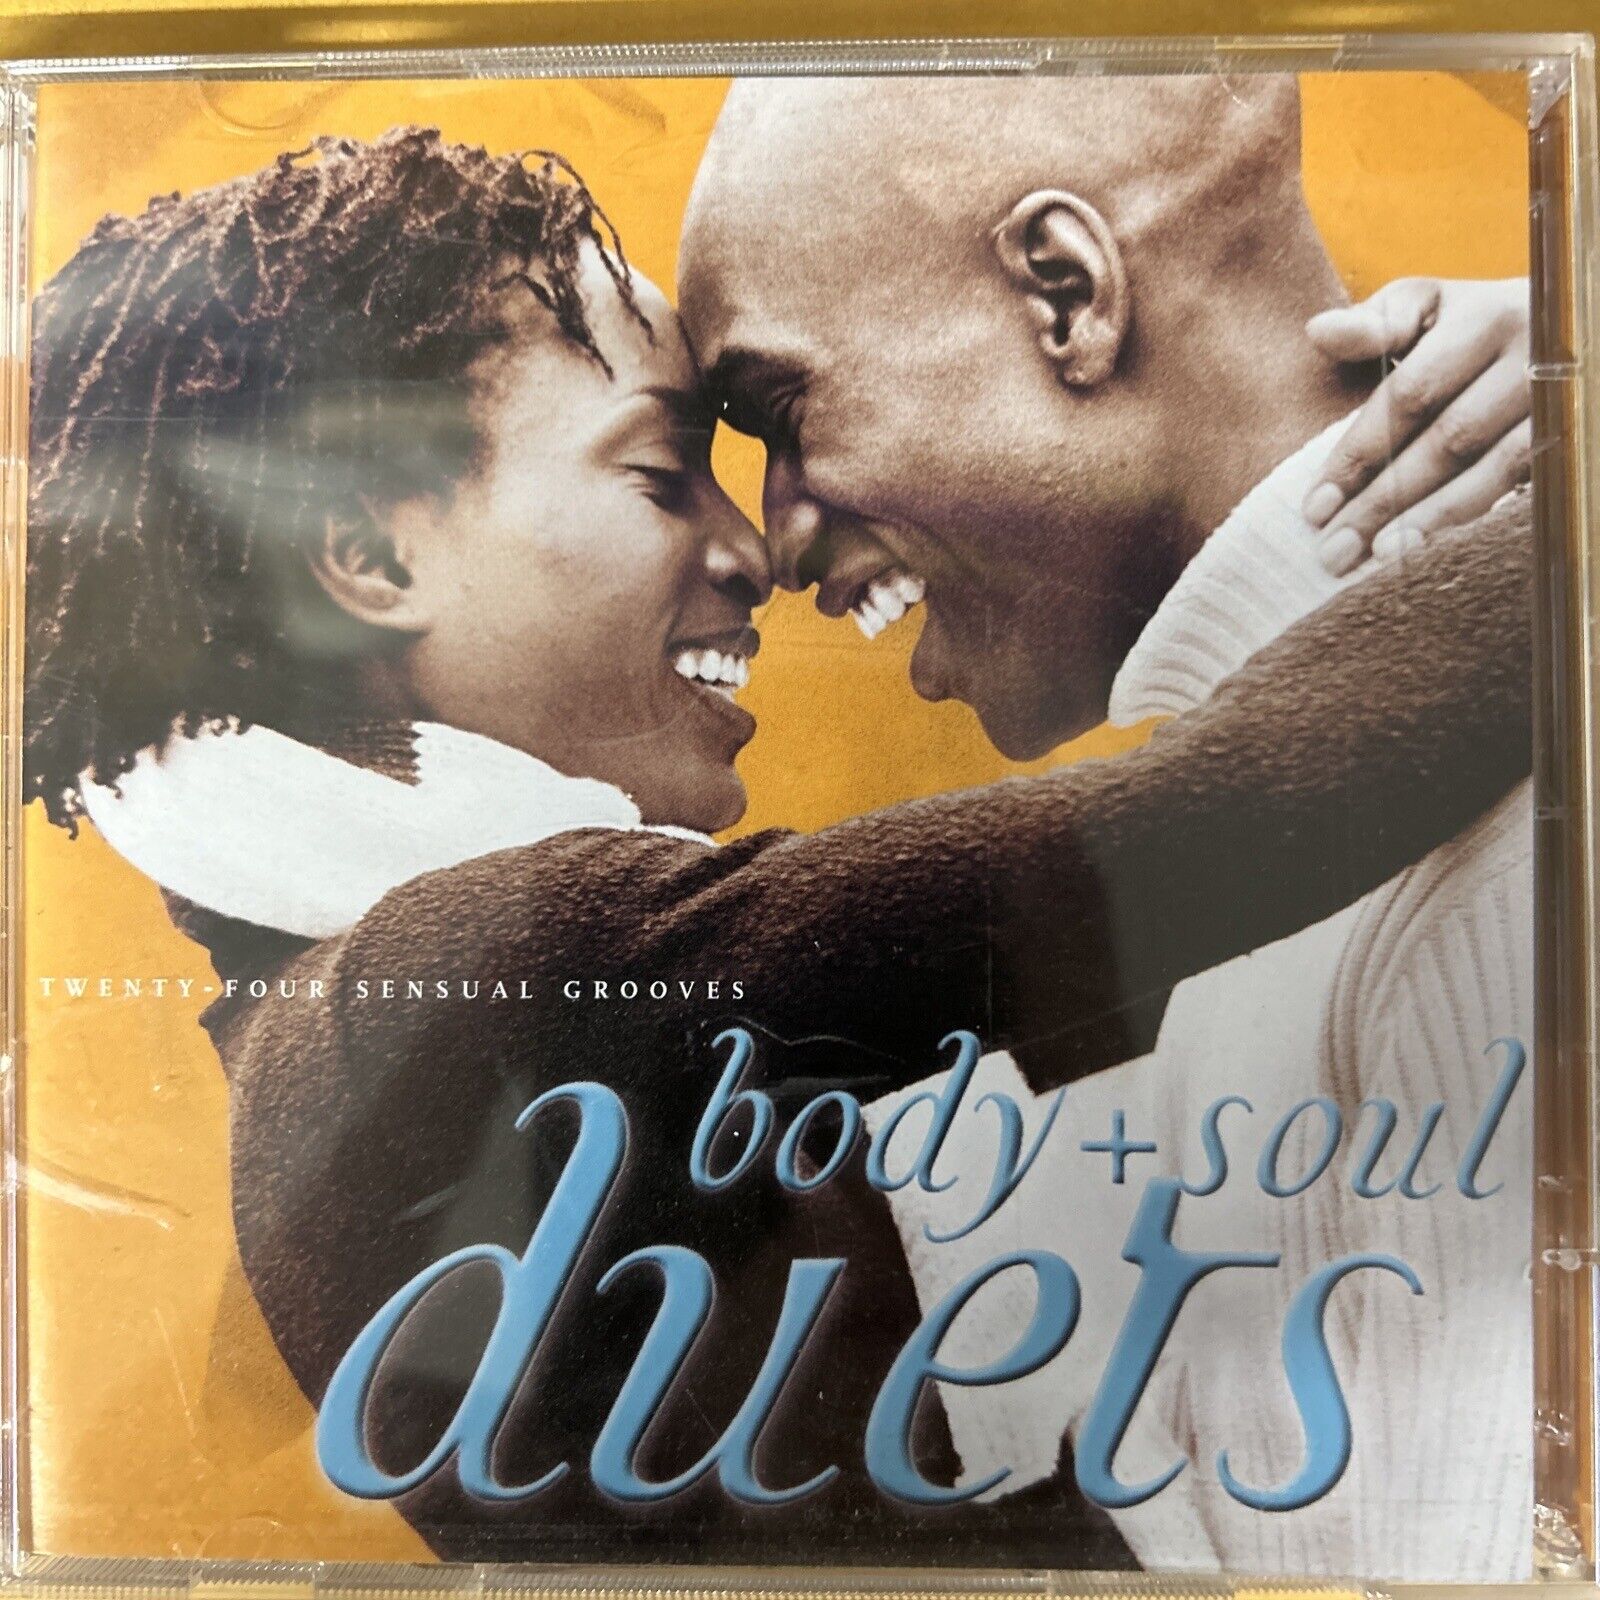 Body & Soul: Duets - Audio CD By Various - VERY GOOD